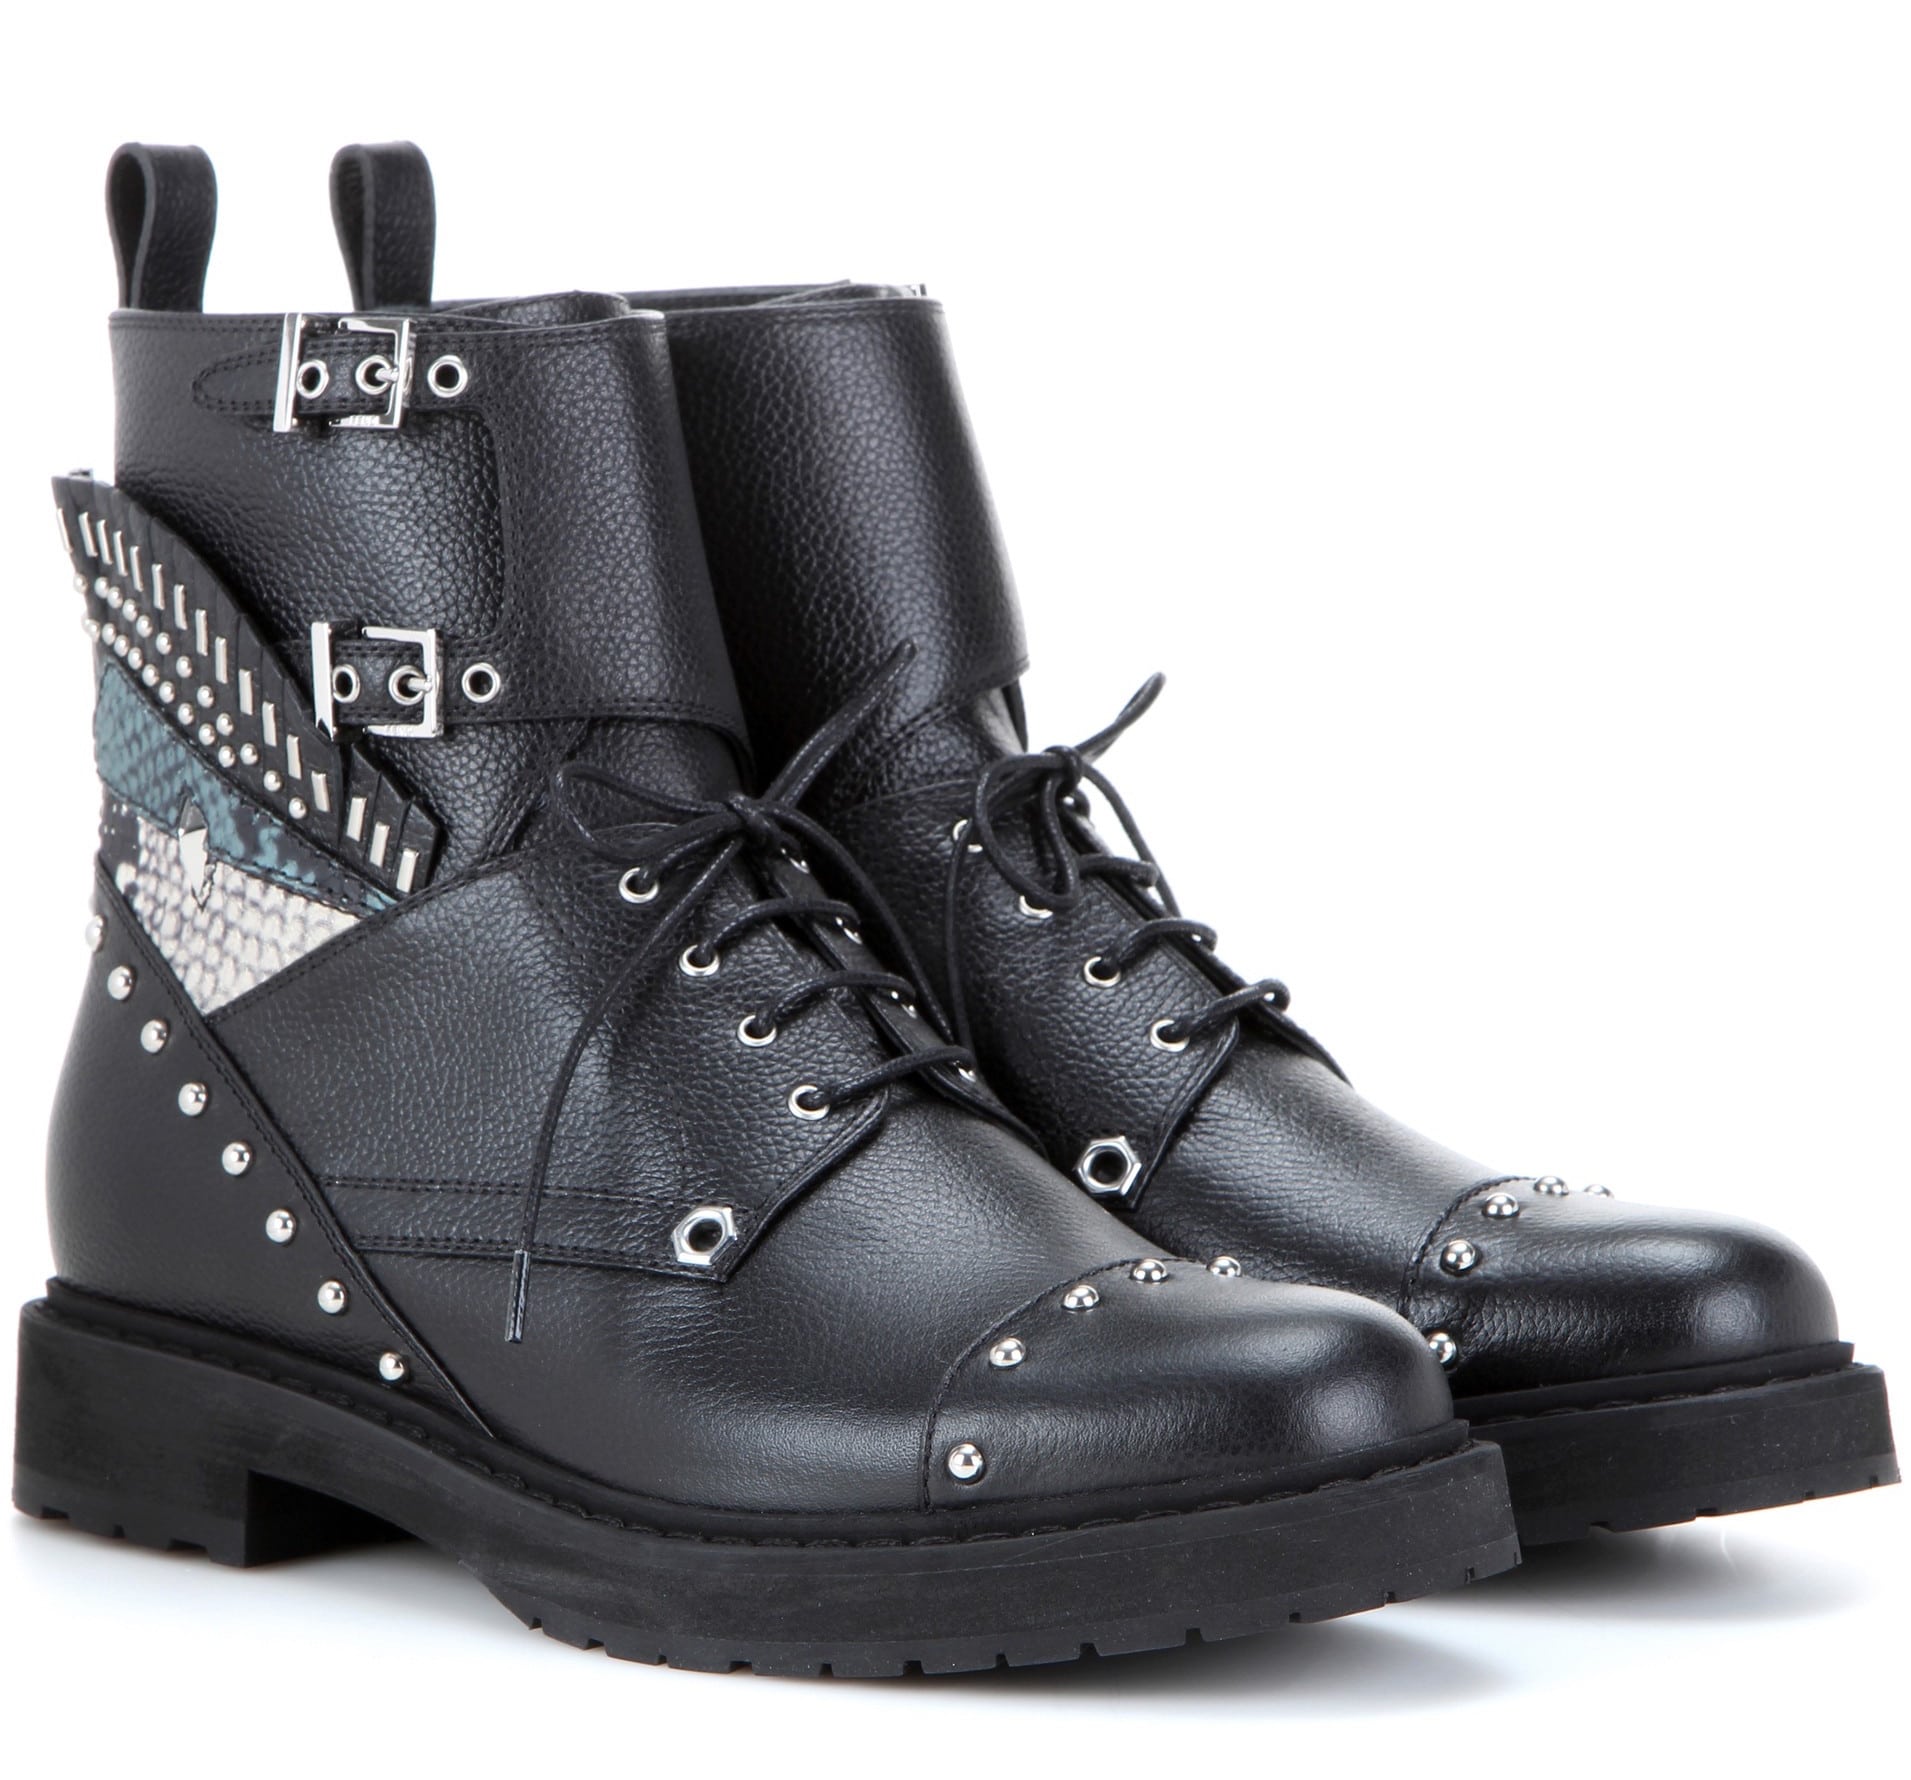 Designer Combat Boots For Fall 2016 - Spotted Fashion